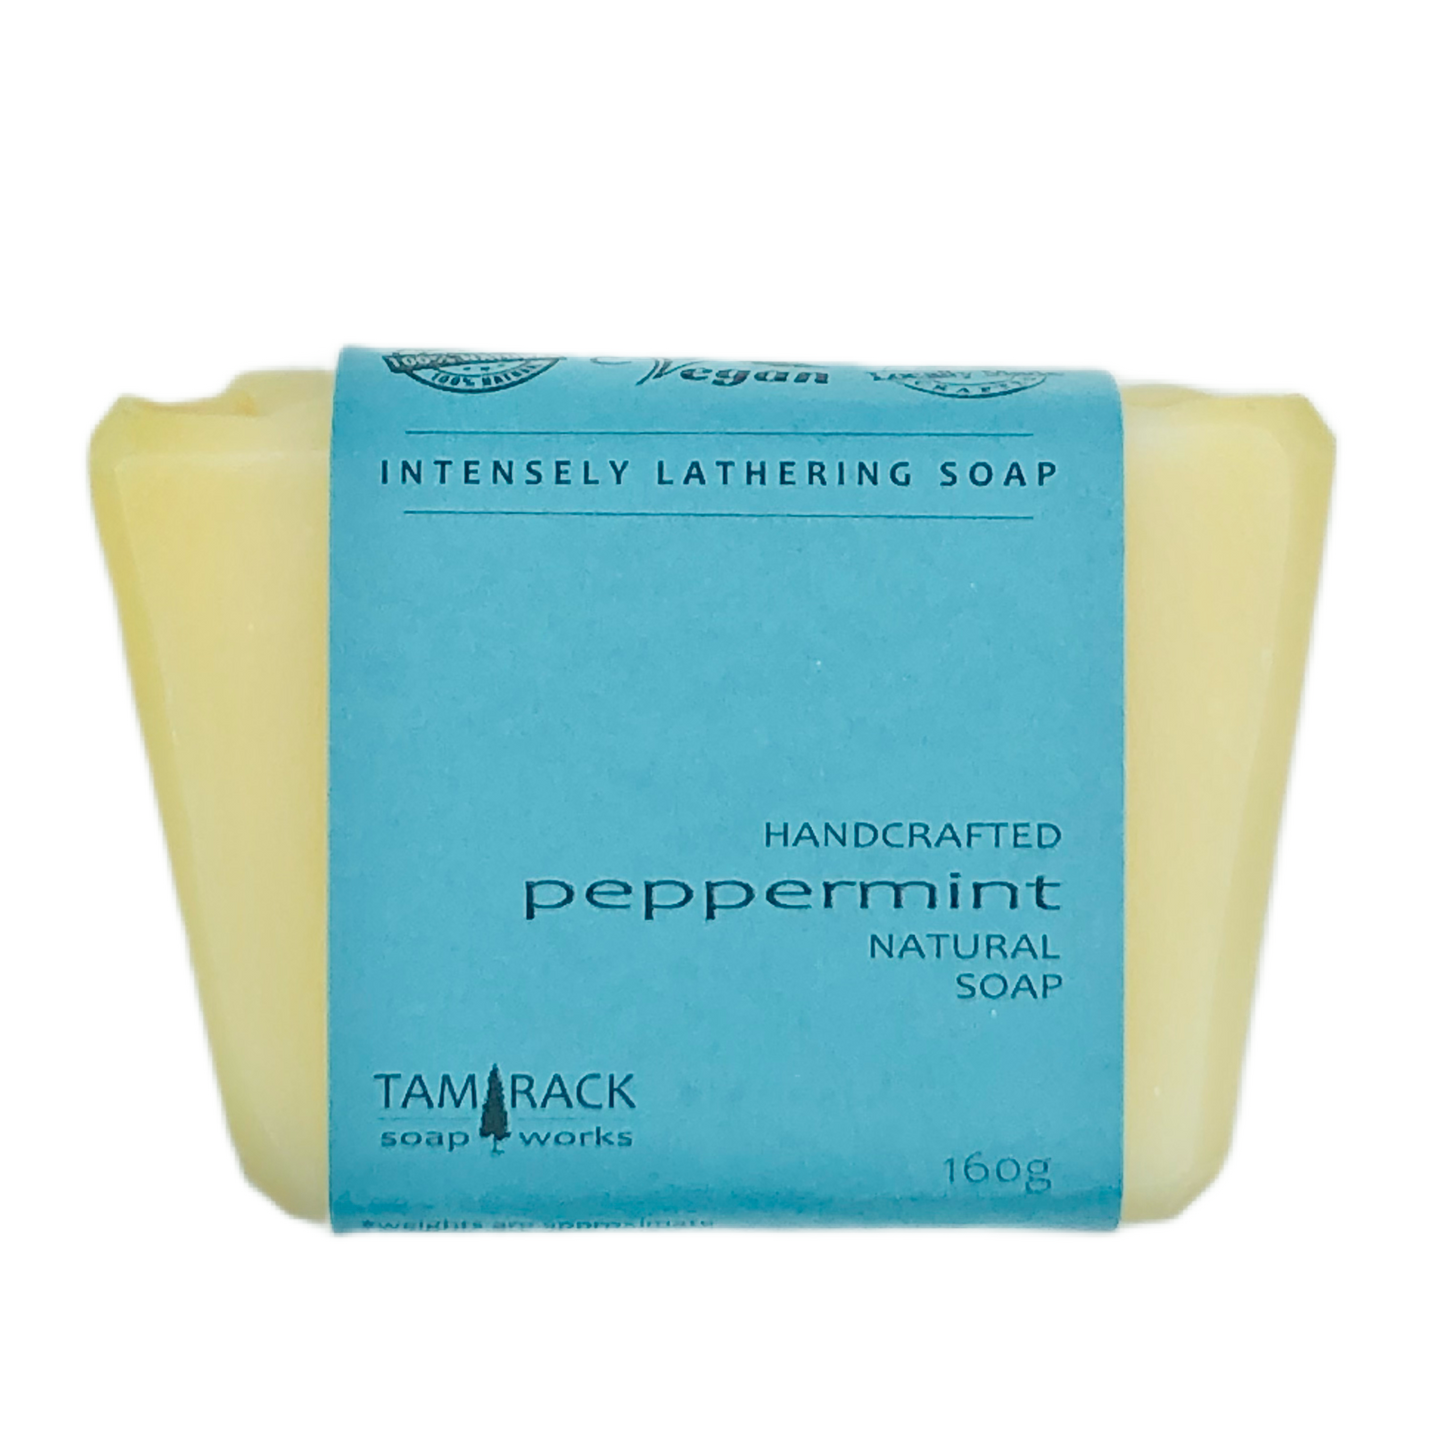 Peppermint Soap Bar | Intensely Lathering Soap